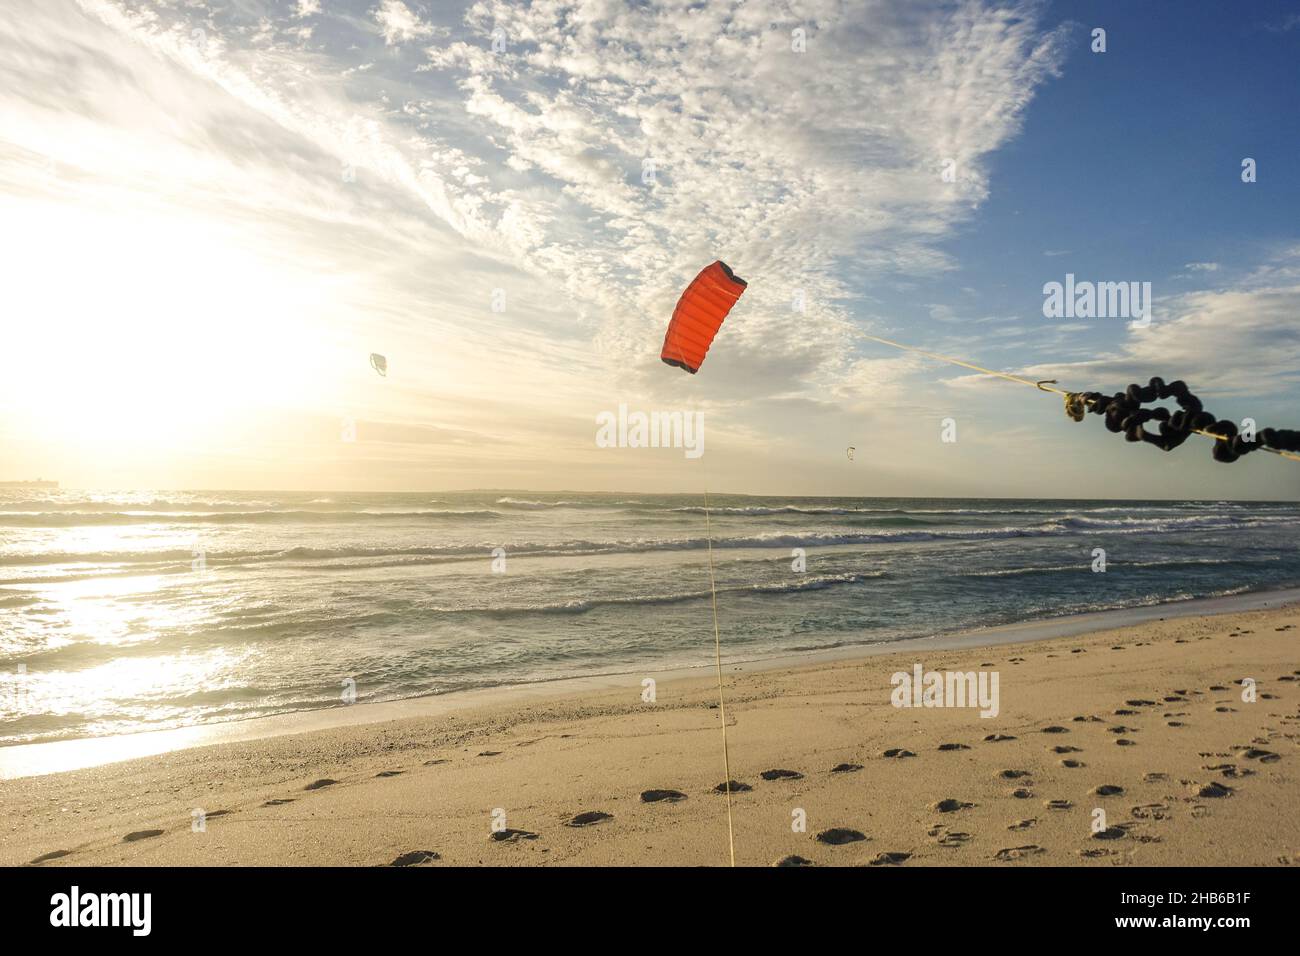 Hand holding a kite on the beach of Blouberg, Cape Town, South Africa Stock Photo